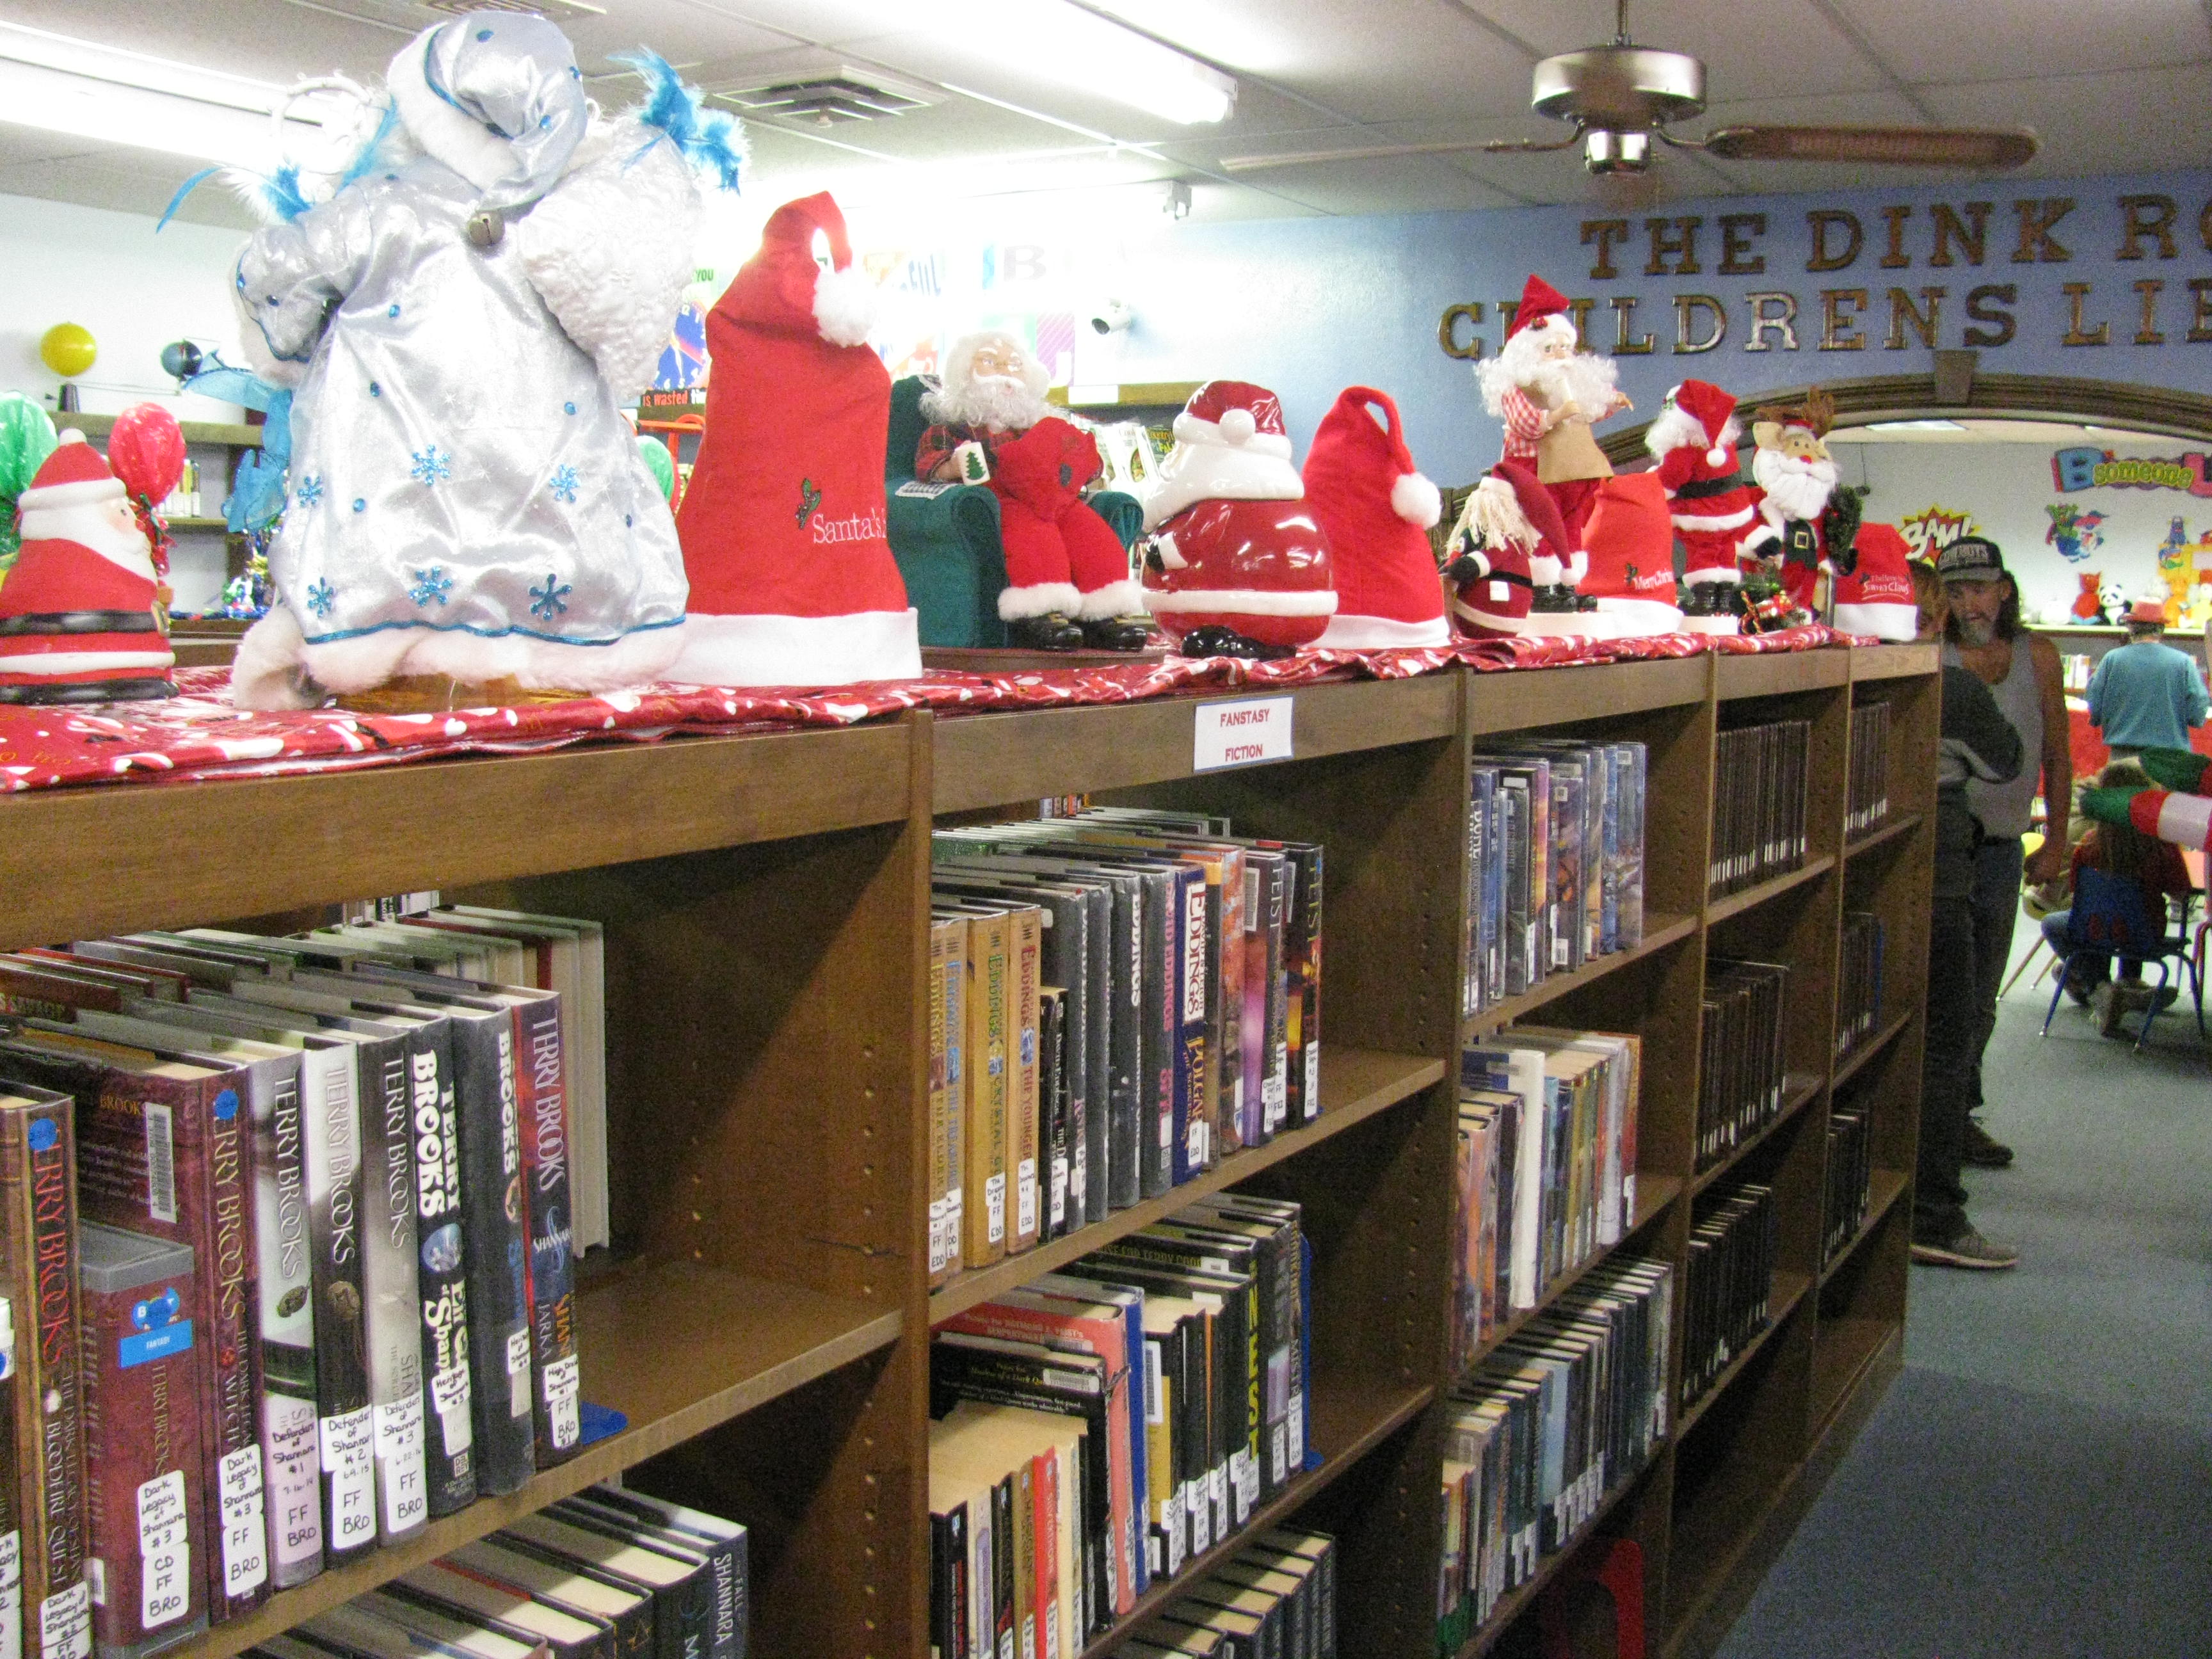 THE DECORATING OF THE LIBRARY